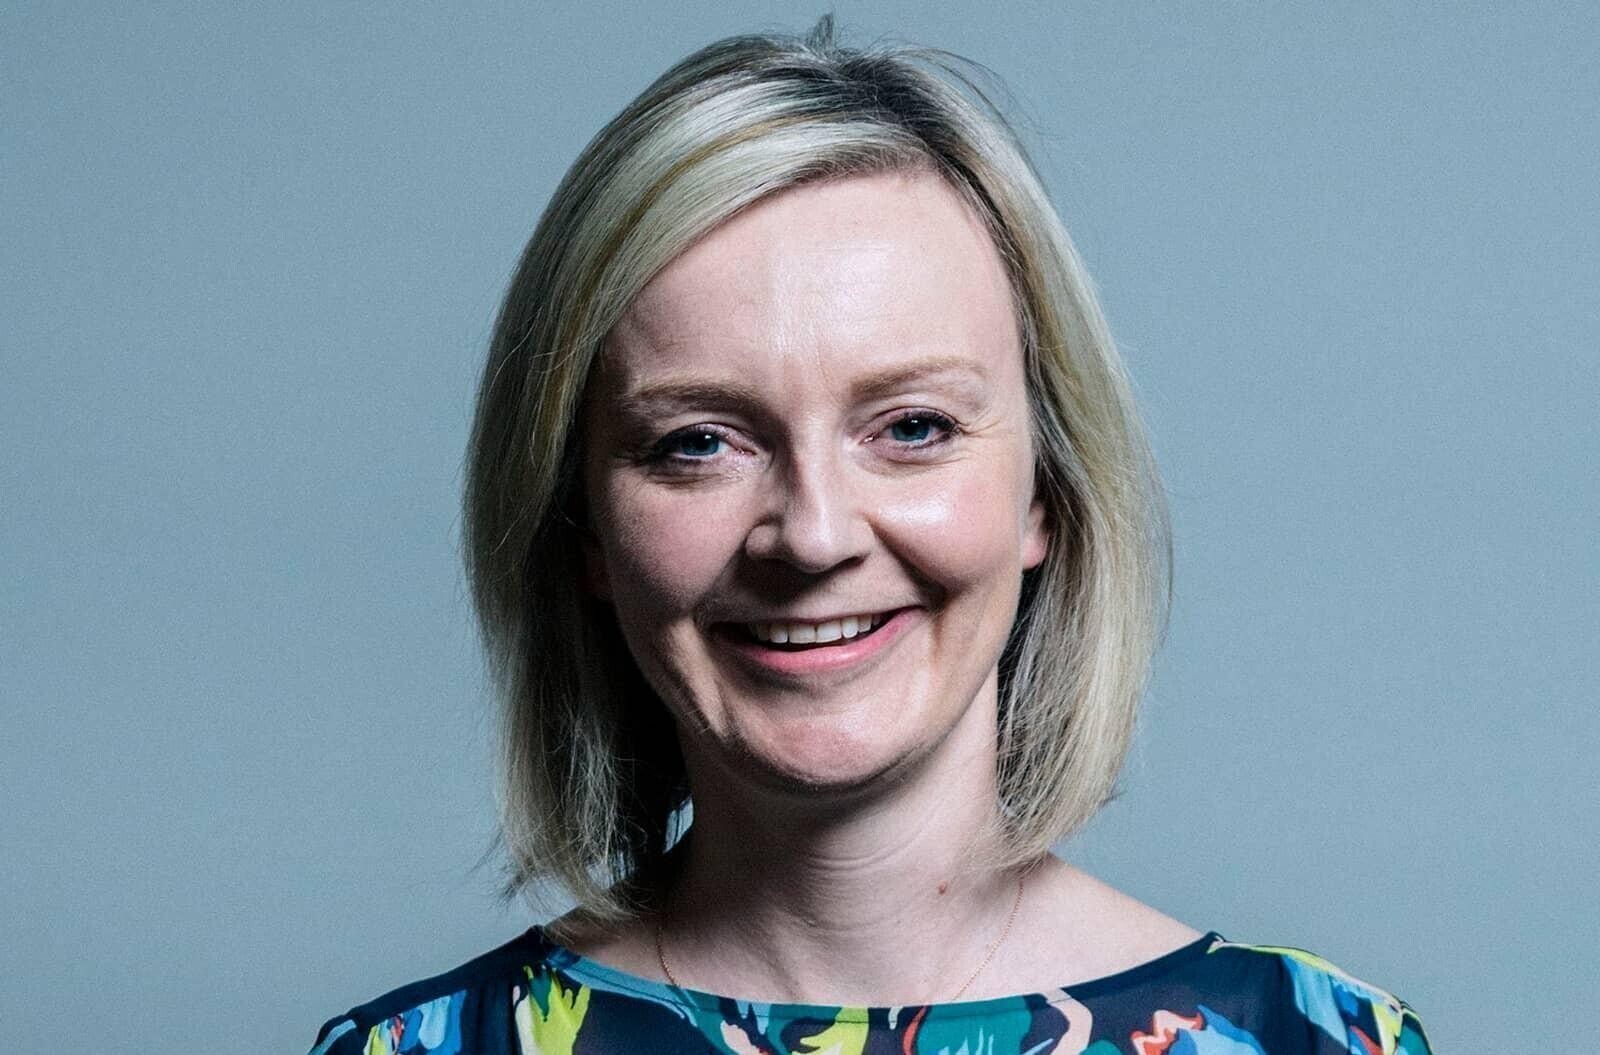 Liz Truss has a chance of becoming the next prime minister after boris johnson